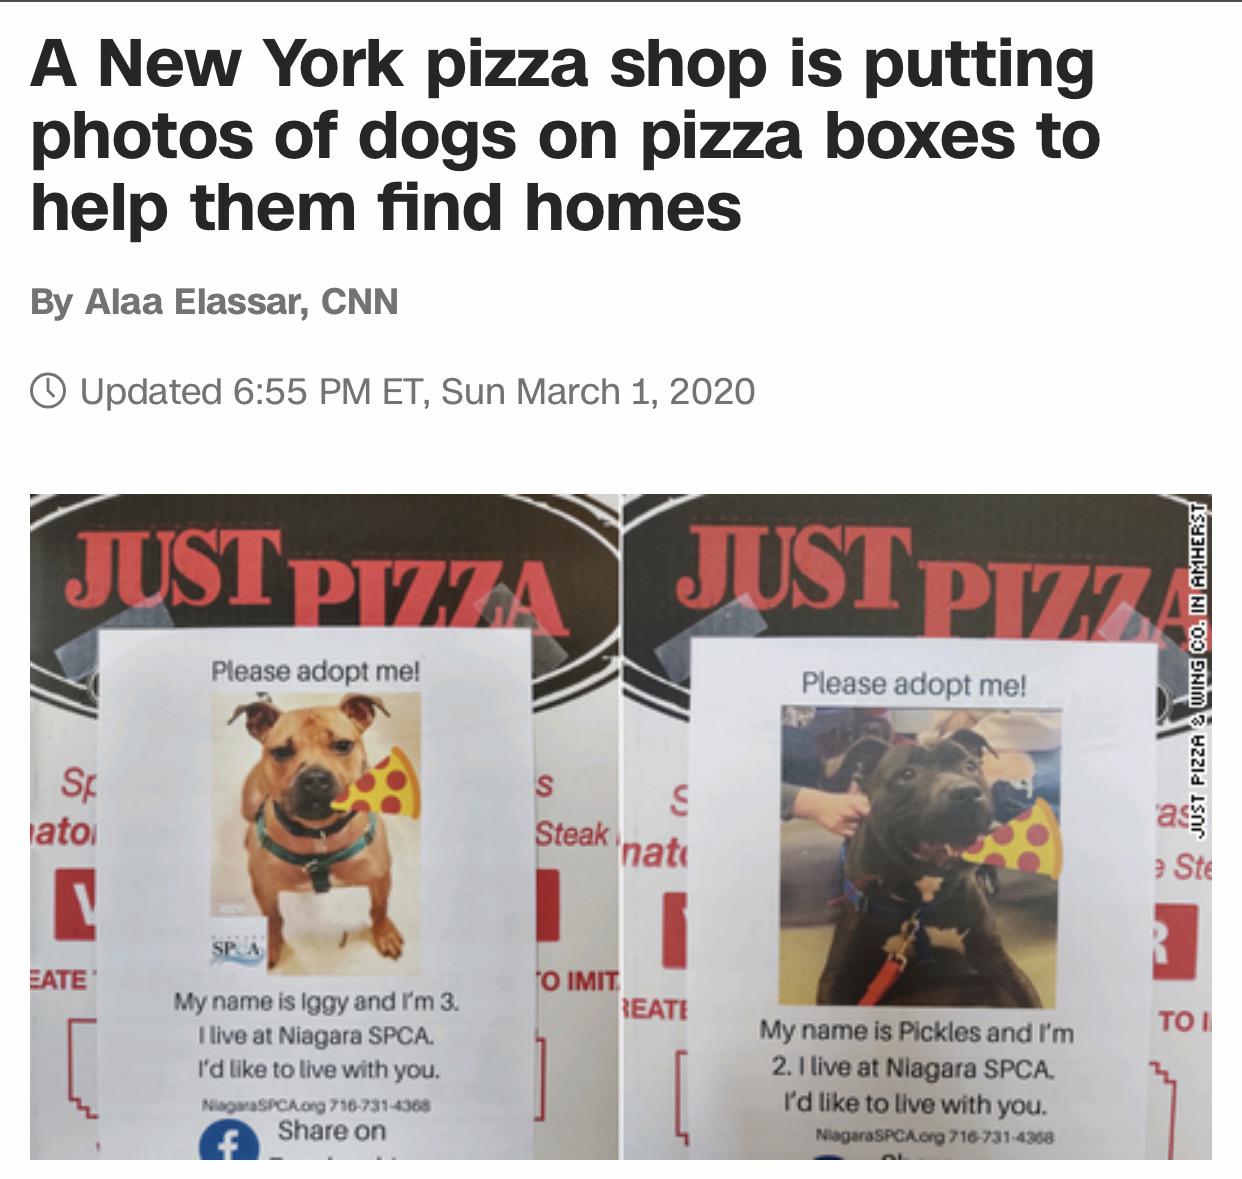 facebook time - A New York pizza shop is putting photos of dogs on pizza boxes to help them find homes By Alaa Elassar, Cnn o Updated Et, Sun Just Pizza Justpizza Wing Co. In Amherst Please adopt me! Please adopt me! Just Pizza ato Steak nato Spa Eate To 